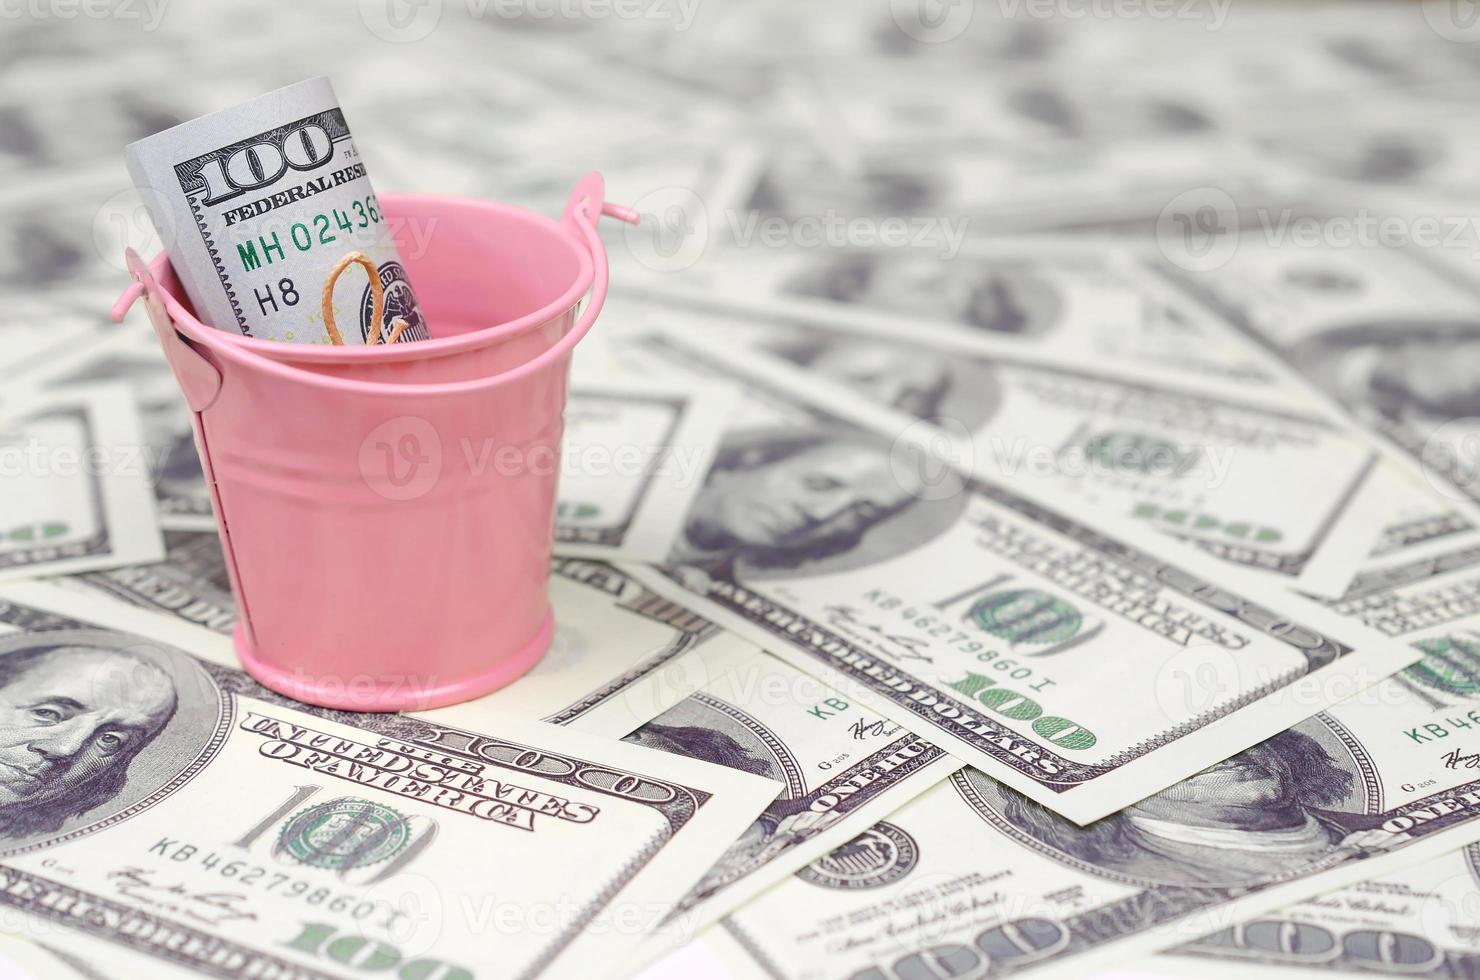 A bundle of US dollars in a metal pink bucket on a set of dollar bills photo